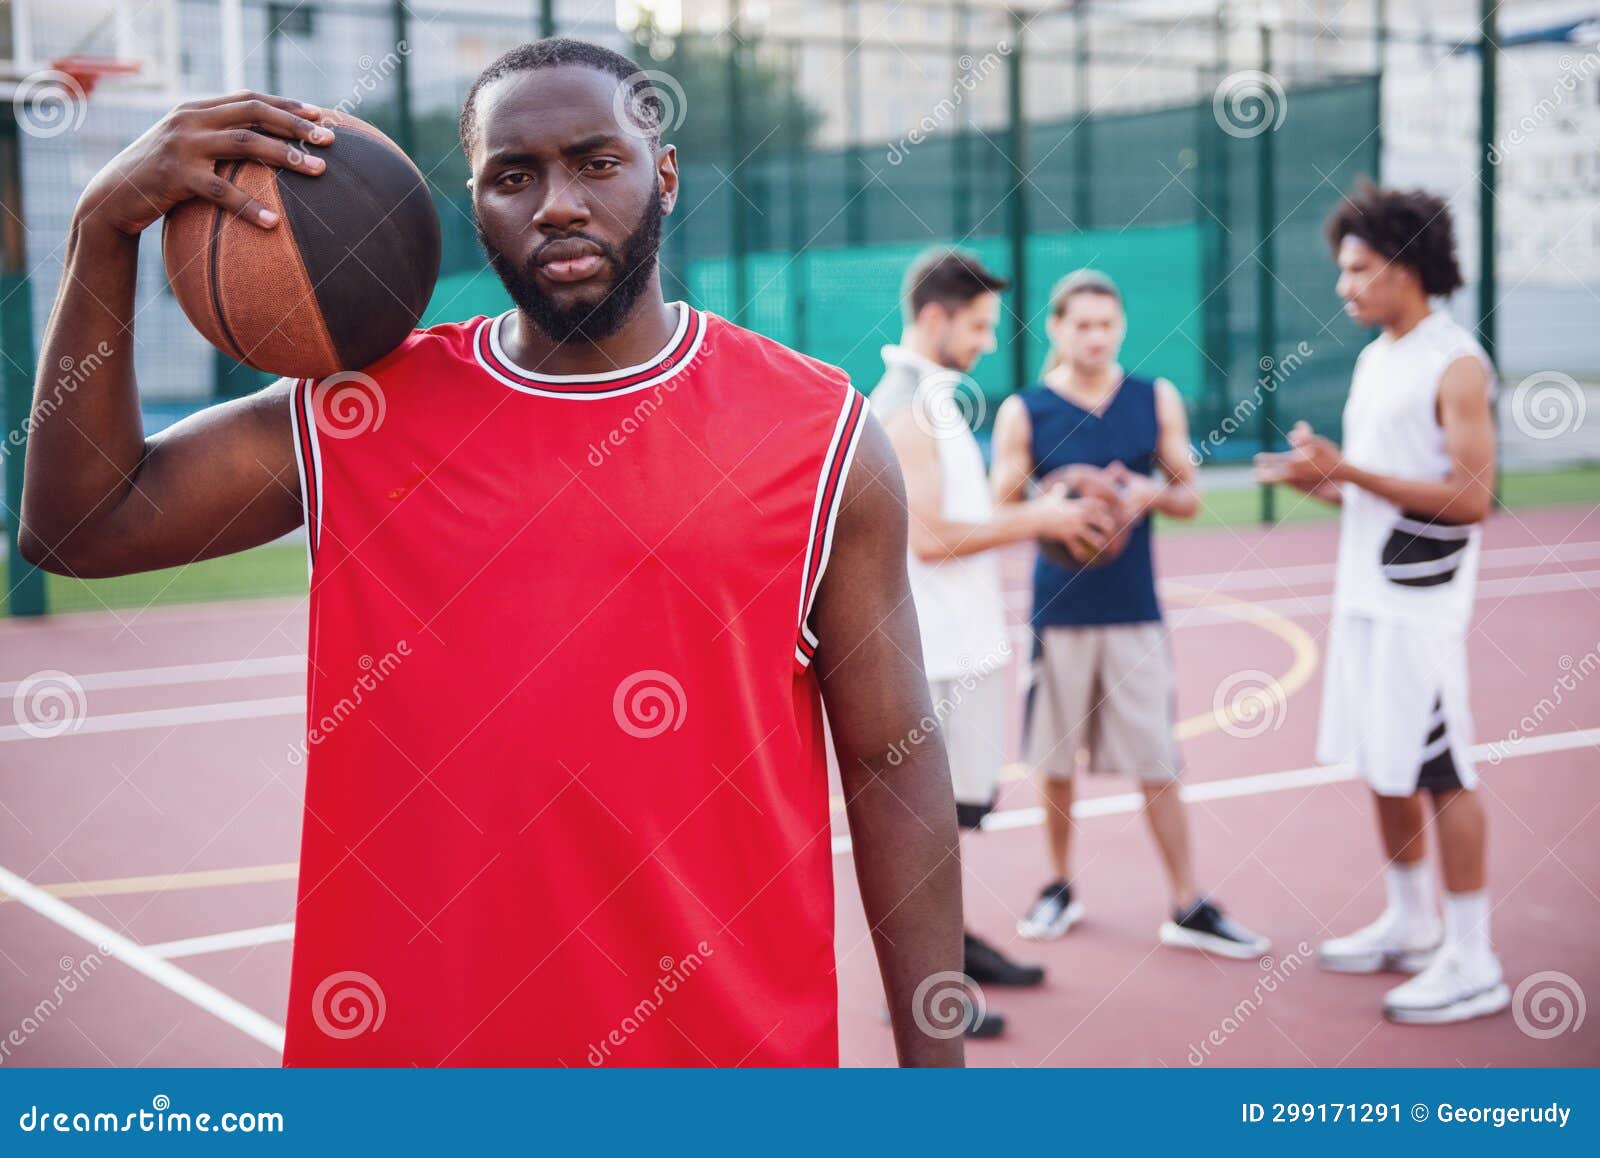 Guys playing basketball stock image. Image of friends - 299171291